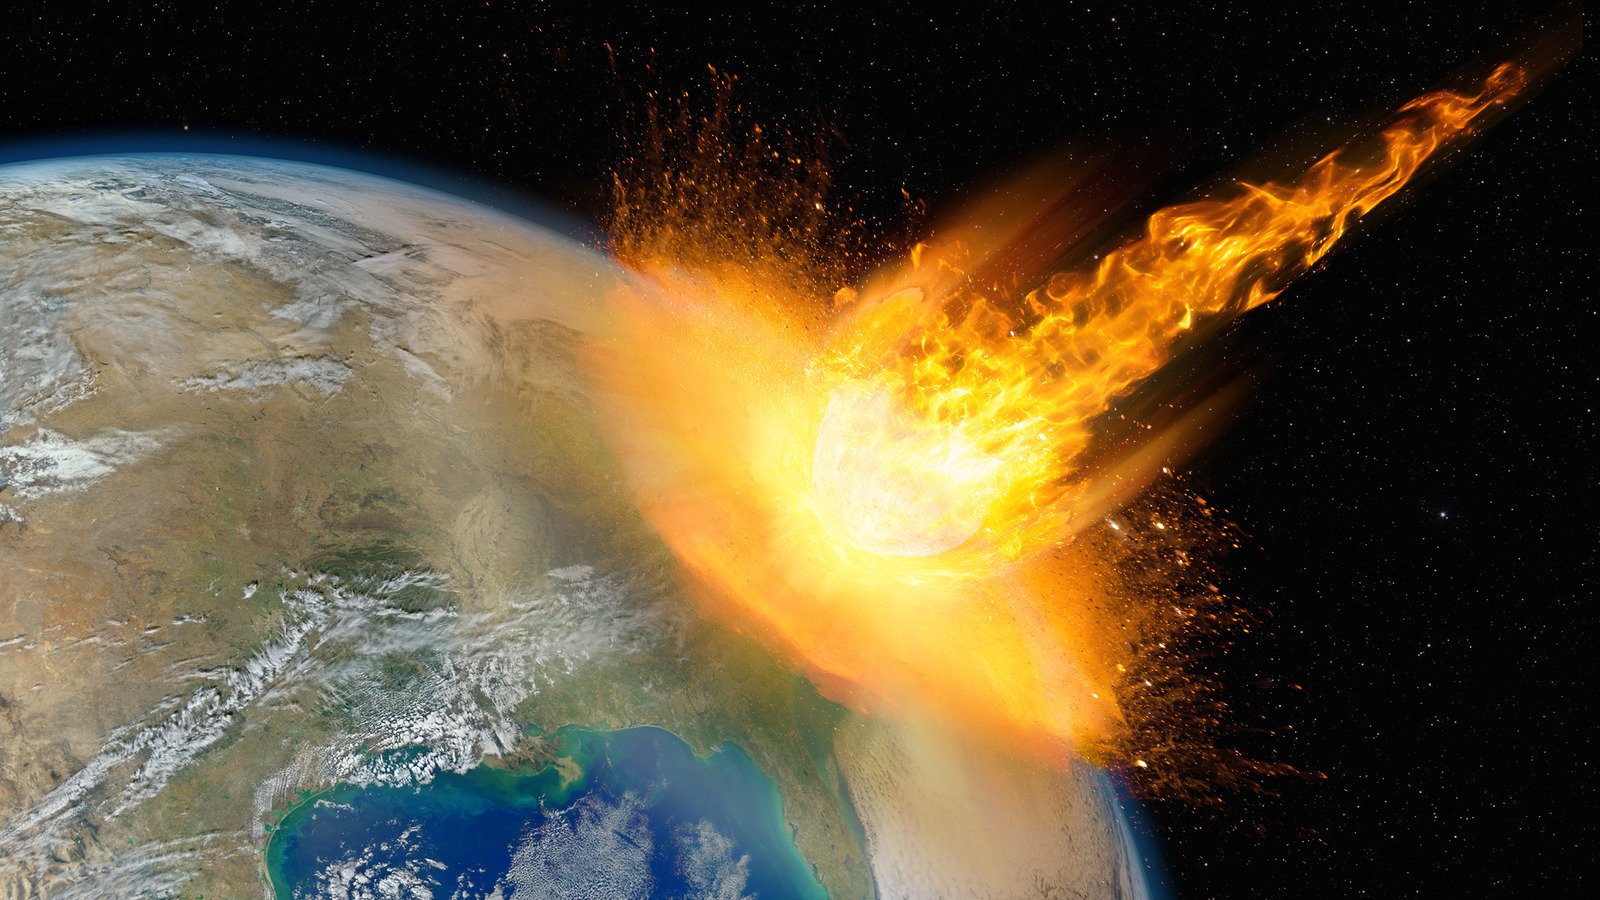 Why The Largest Asteroid Impact In Recorded History Still Puzzles Scientists